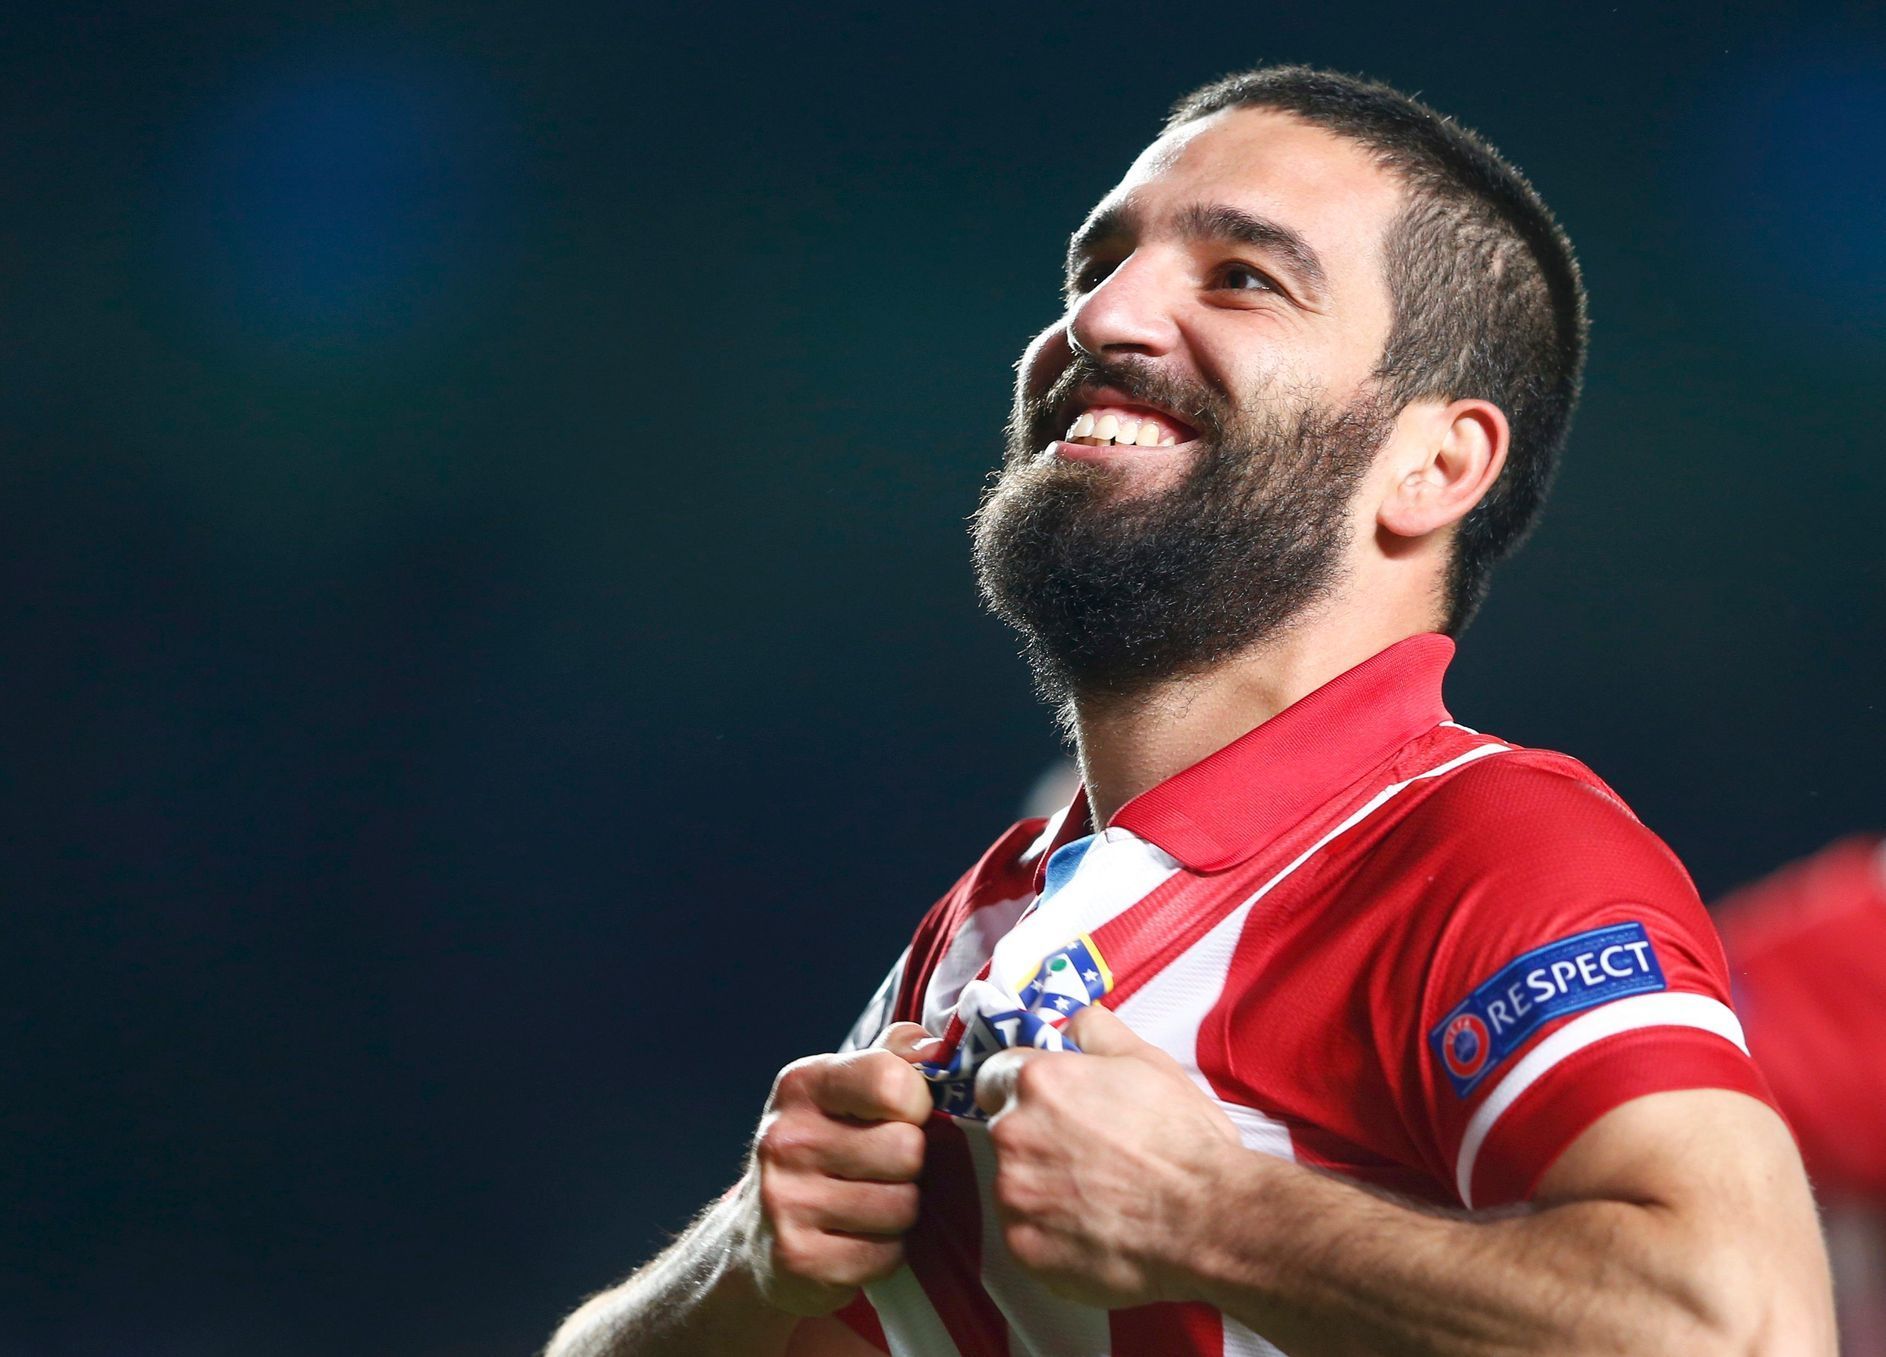 Atletico's Turan reacts at the end of their Champions League semi-final second leg soccer match at Stamford Bridge against Chelsea in London